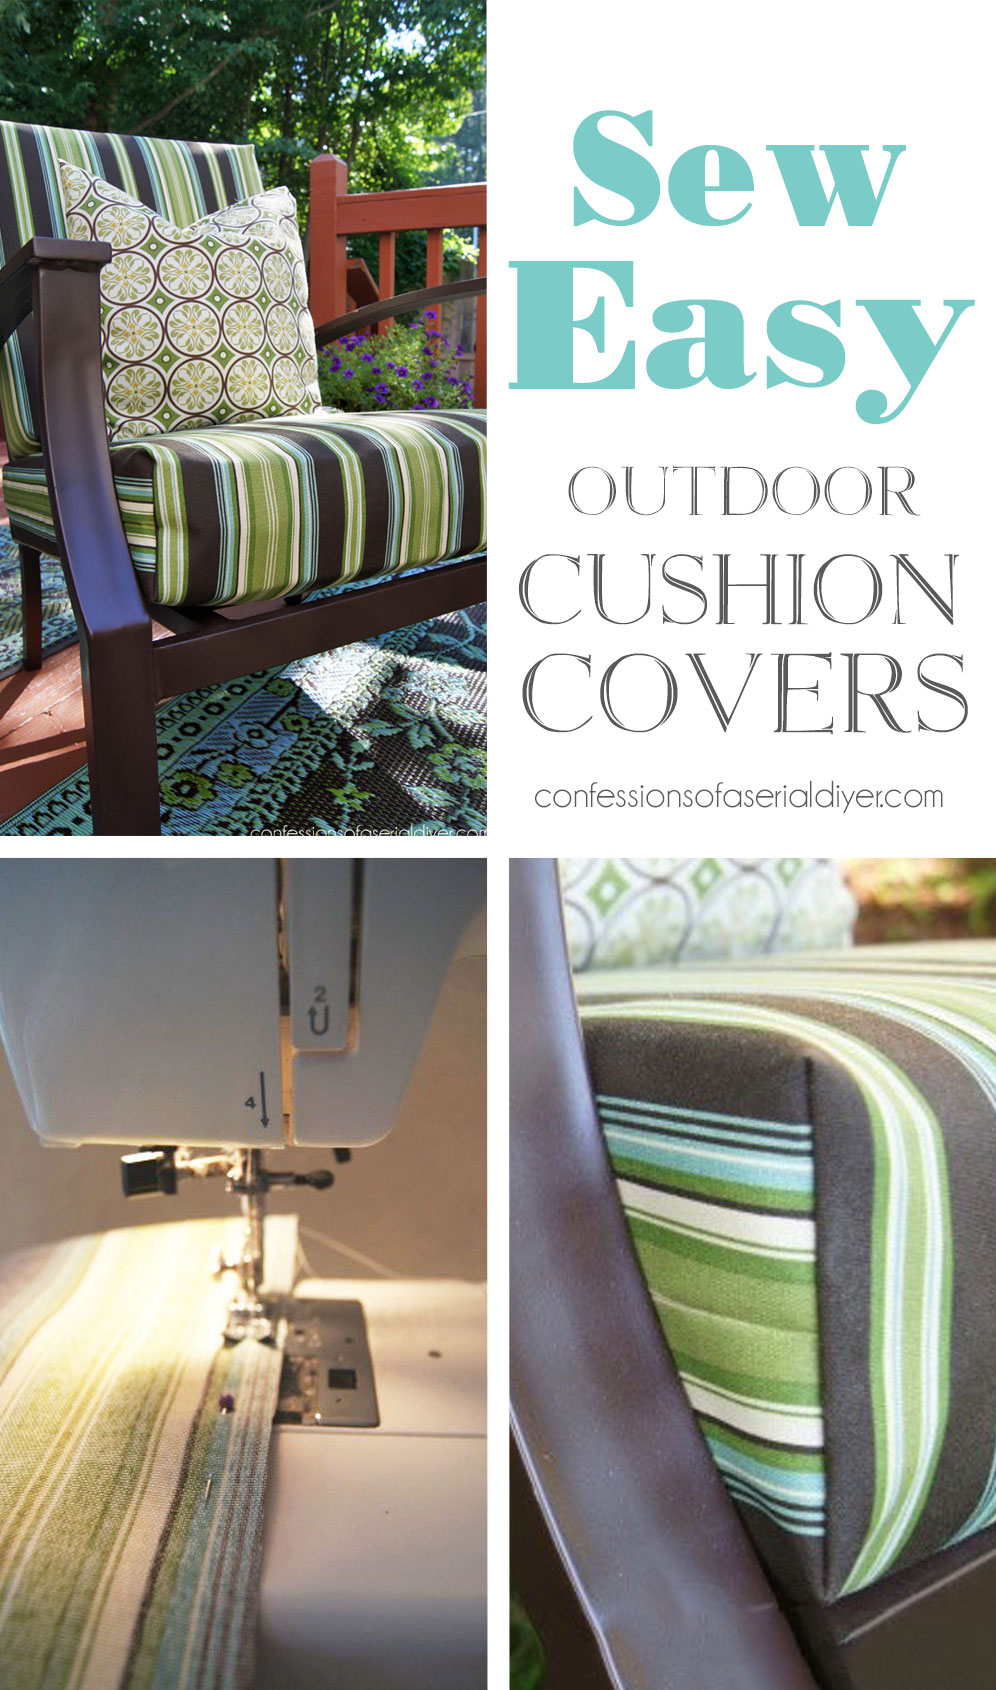 Sew Easy Outdoor Cushion Covers, How To Make Outdoor Patio Cushion Covers